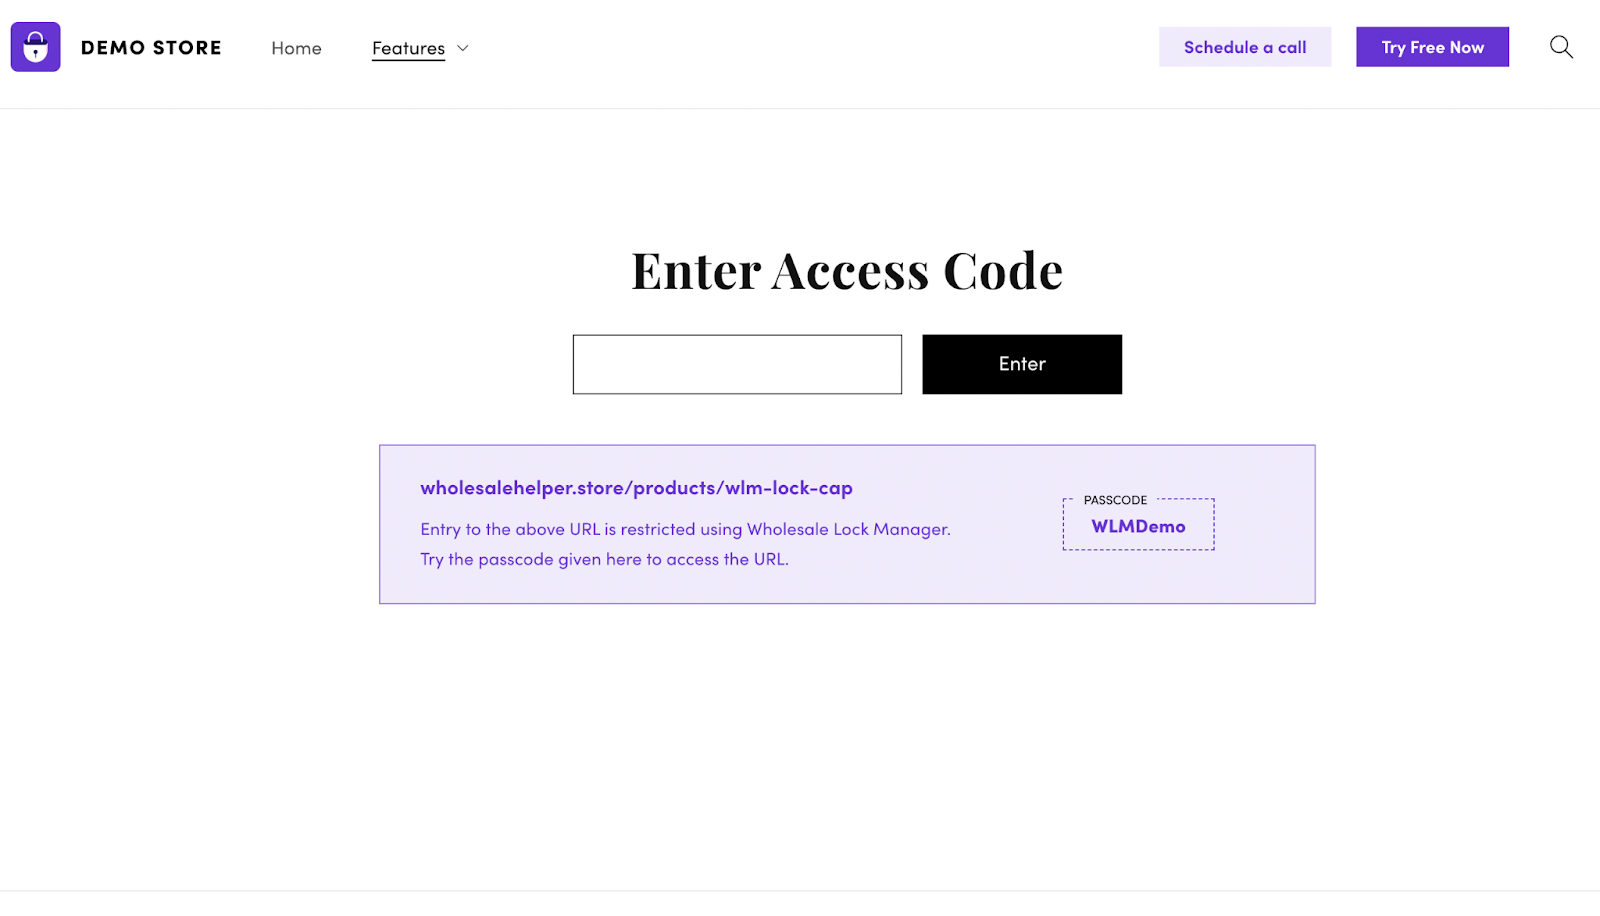 Passcode/Access Code required to access page content - wholesale b2b ecommerce